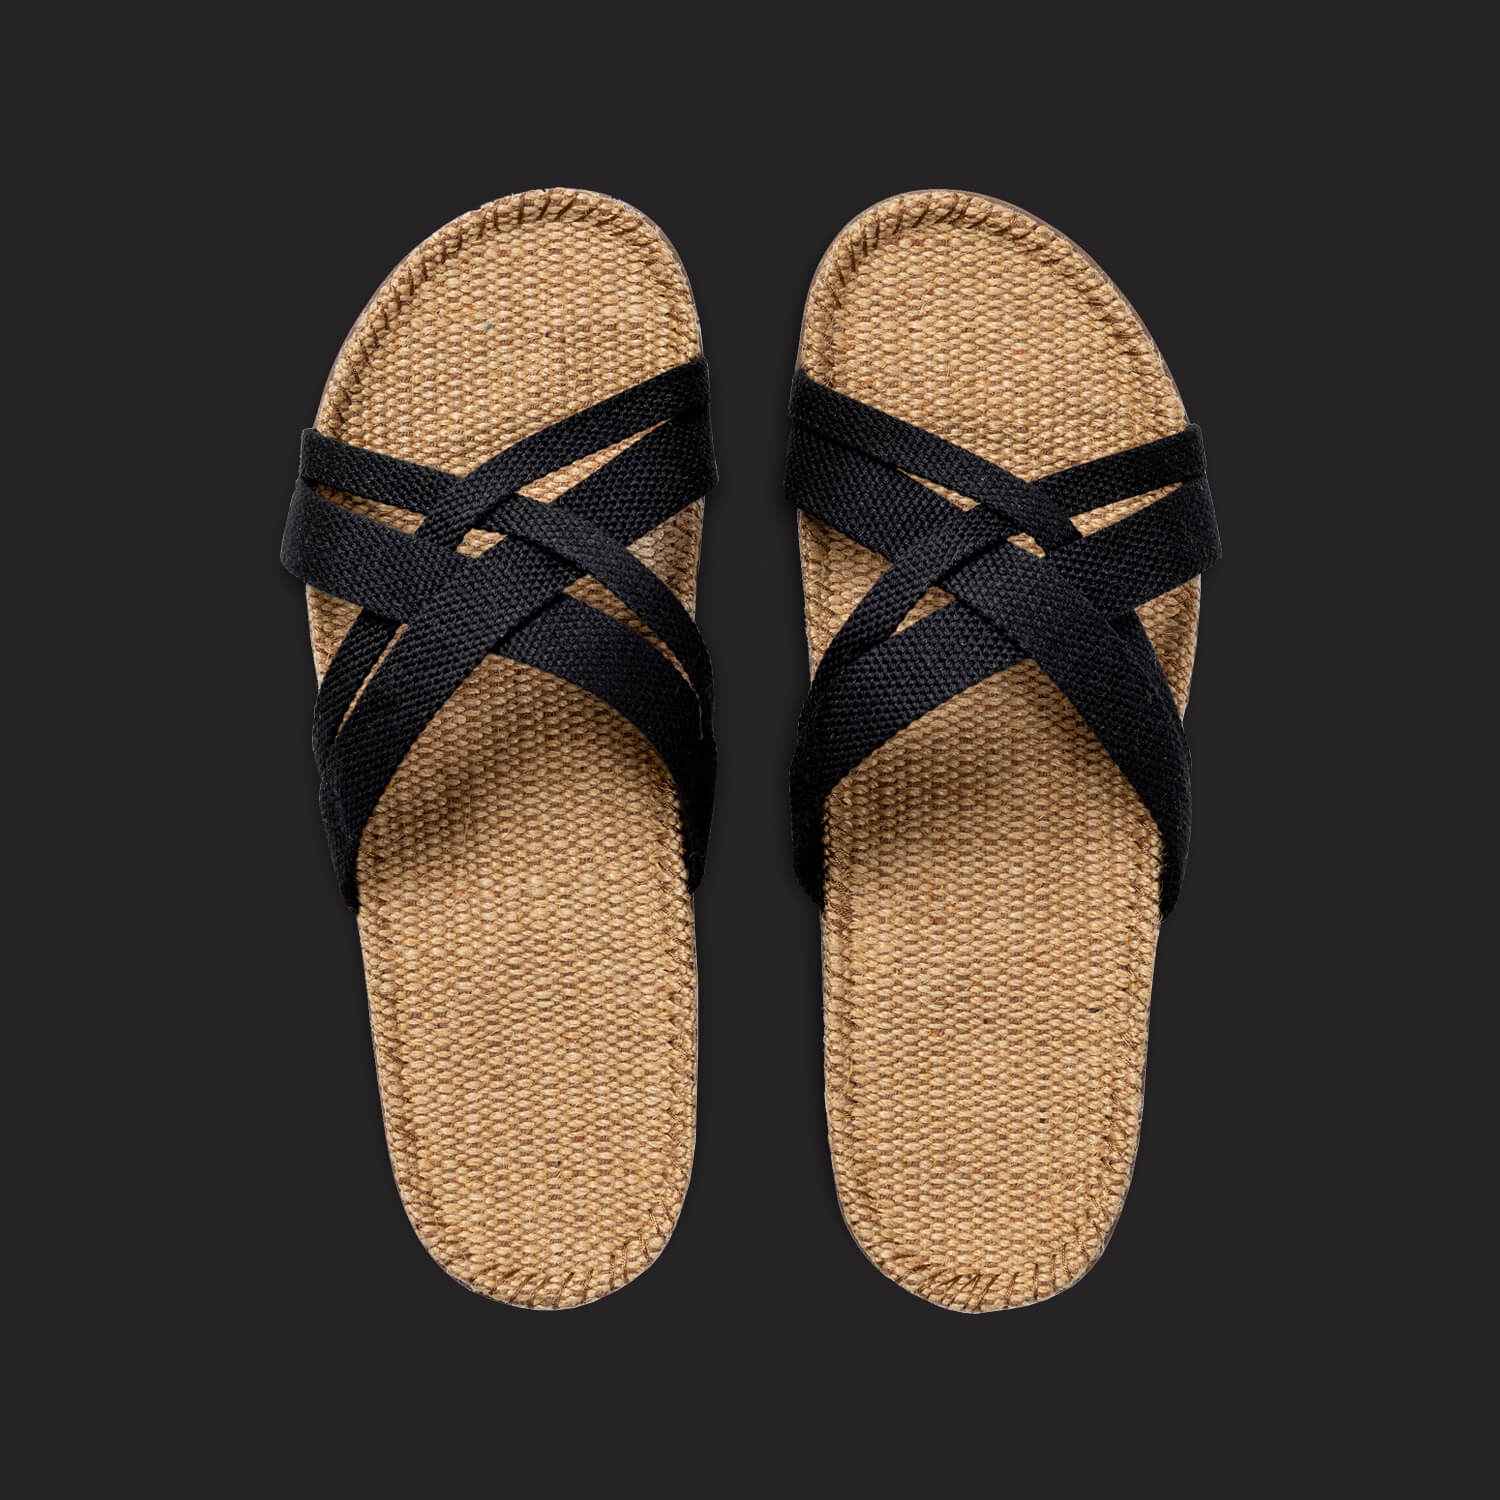 A top view of a pair of womens Shangies sandals with black straps and a natural jute sole